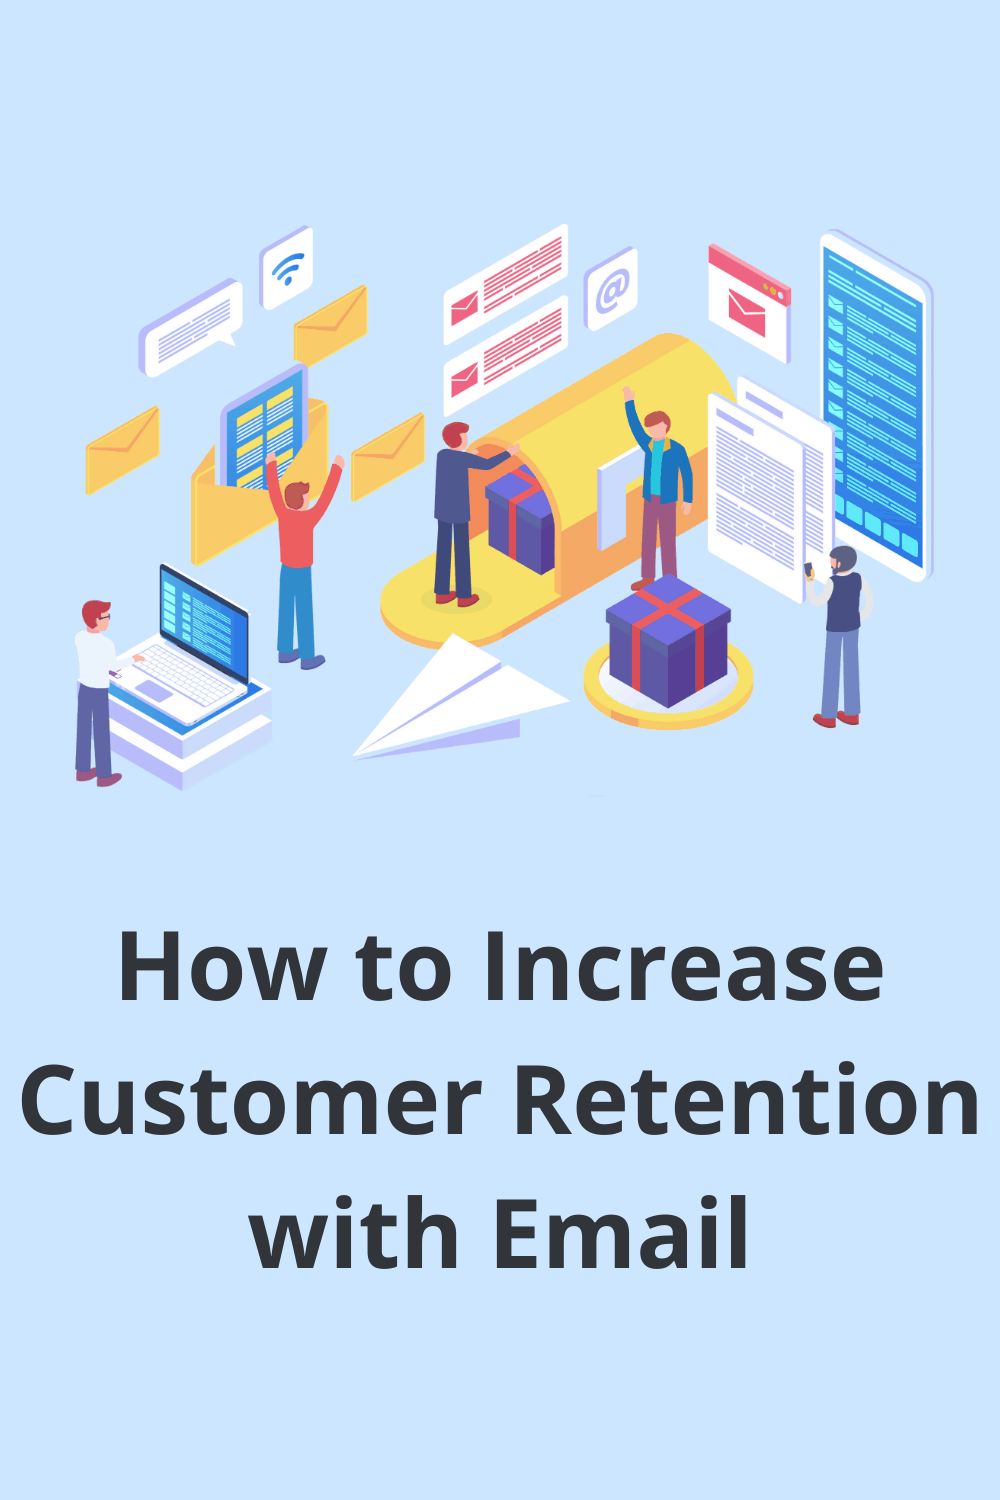 If you’re wondering the best way to increase your customer retention, look no further. Email is the answer. It’s the glitziest way to grow a business. via @scopedesign